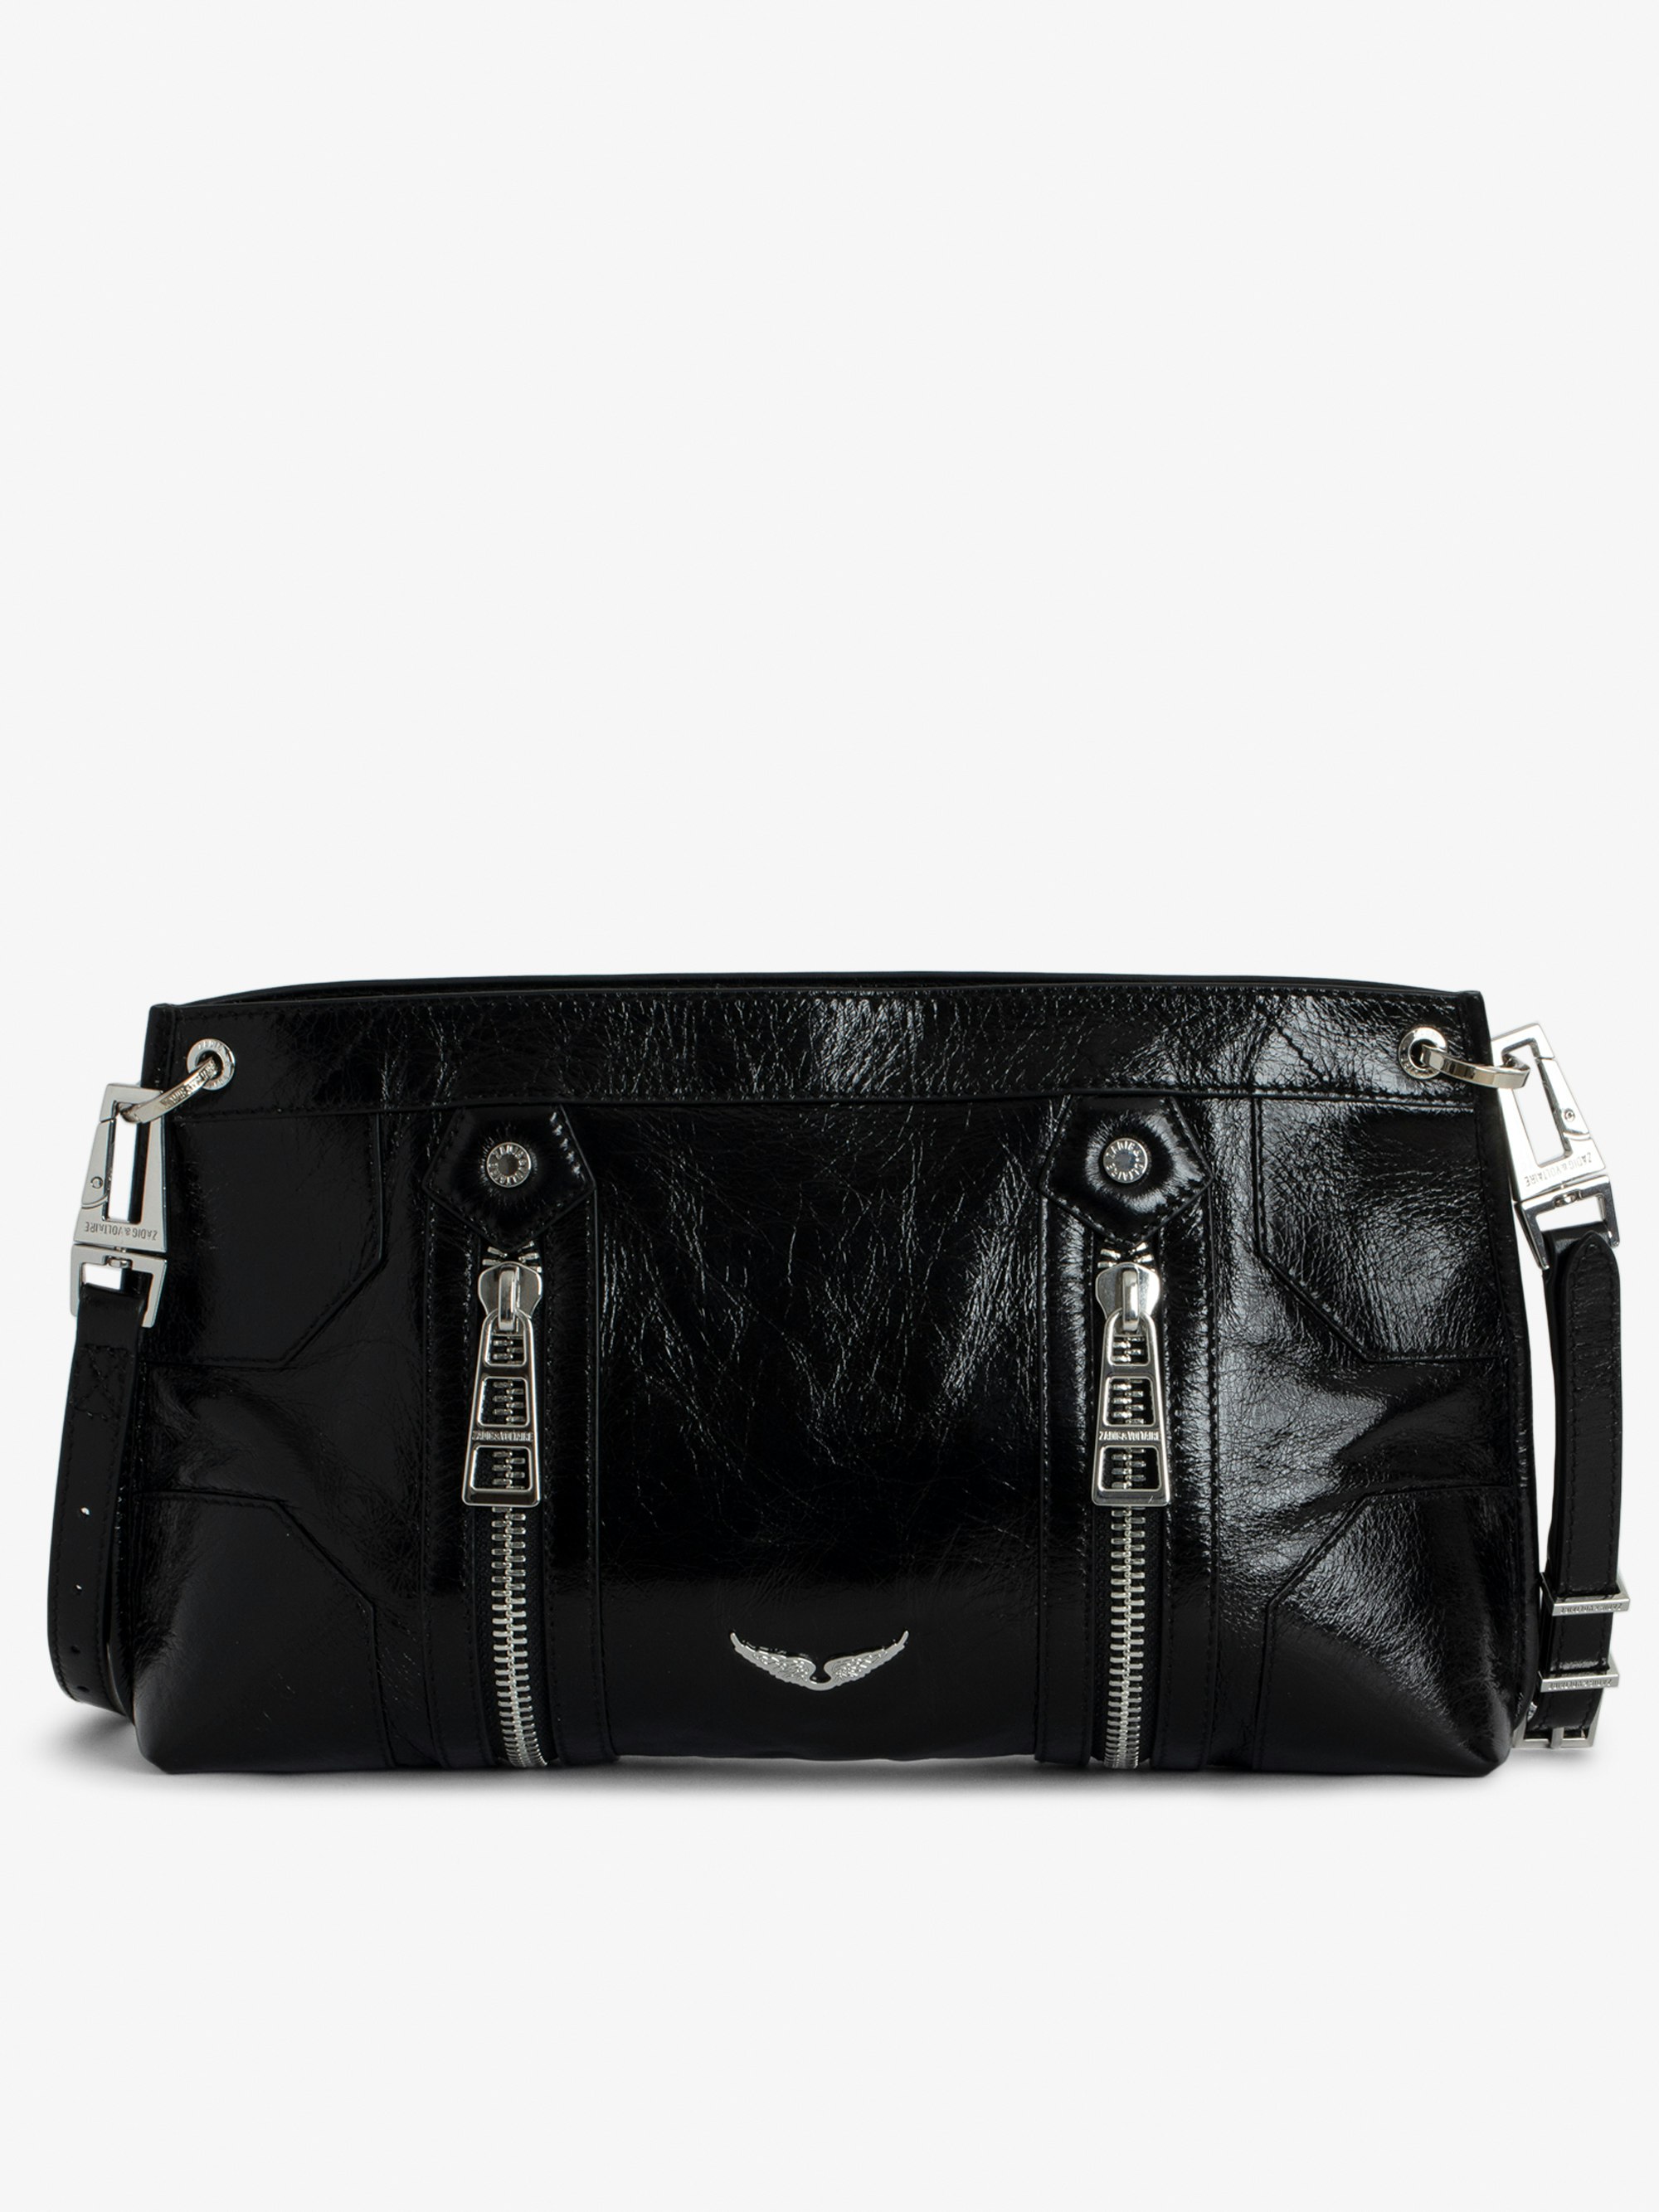 Sunny Moody Bag - Vintage-effect patent leather bag with shoulder strap and signature wings.